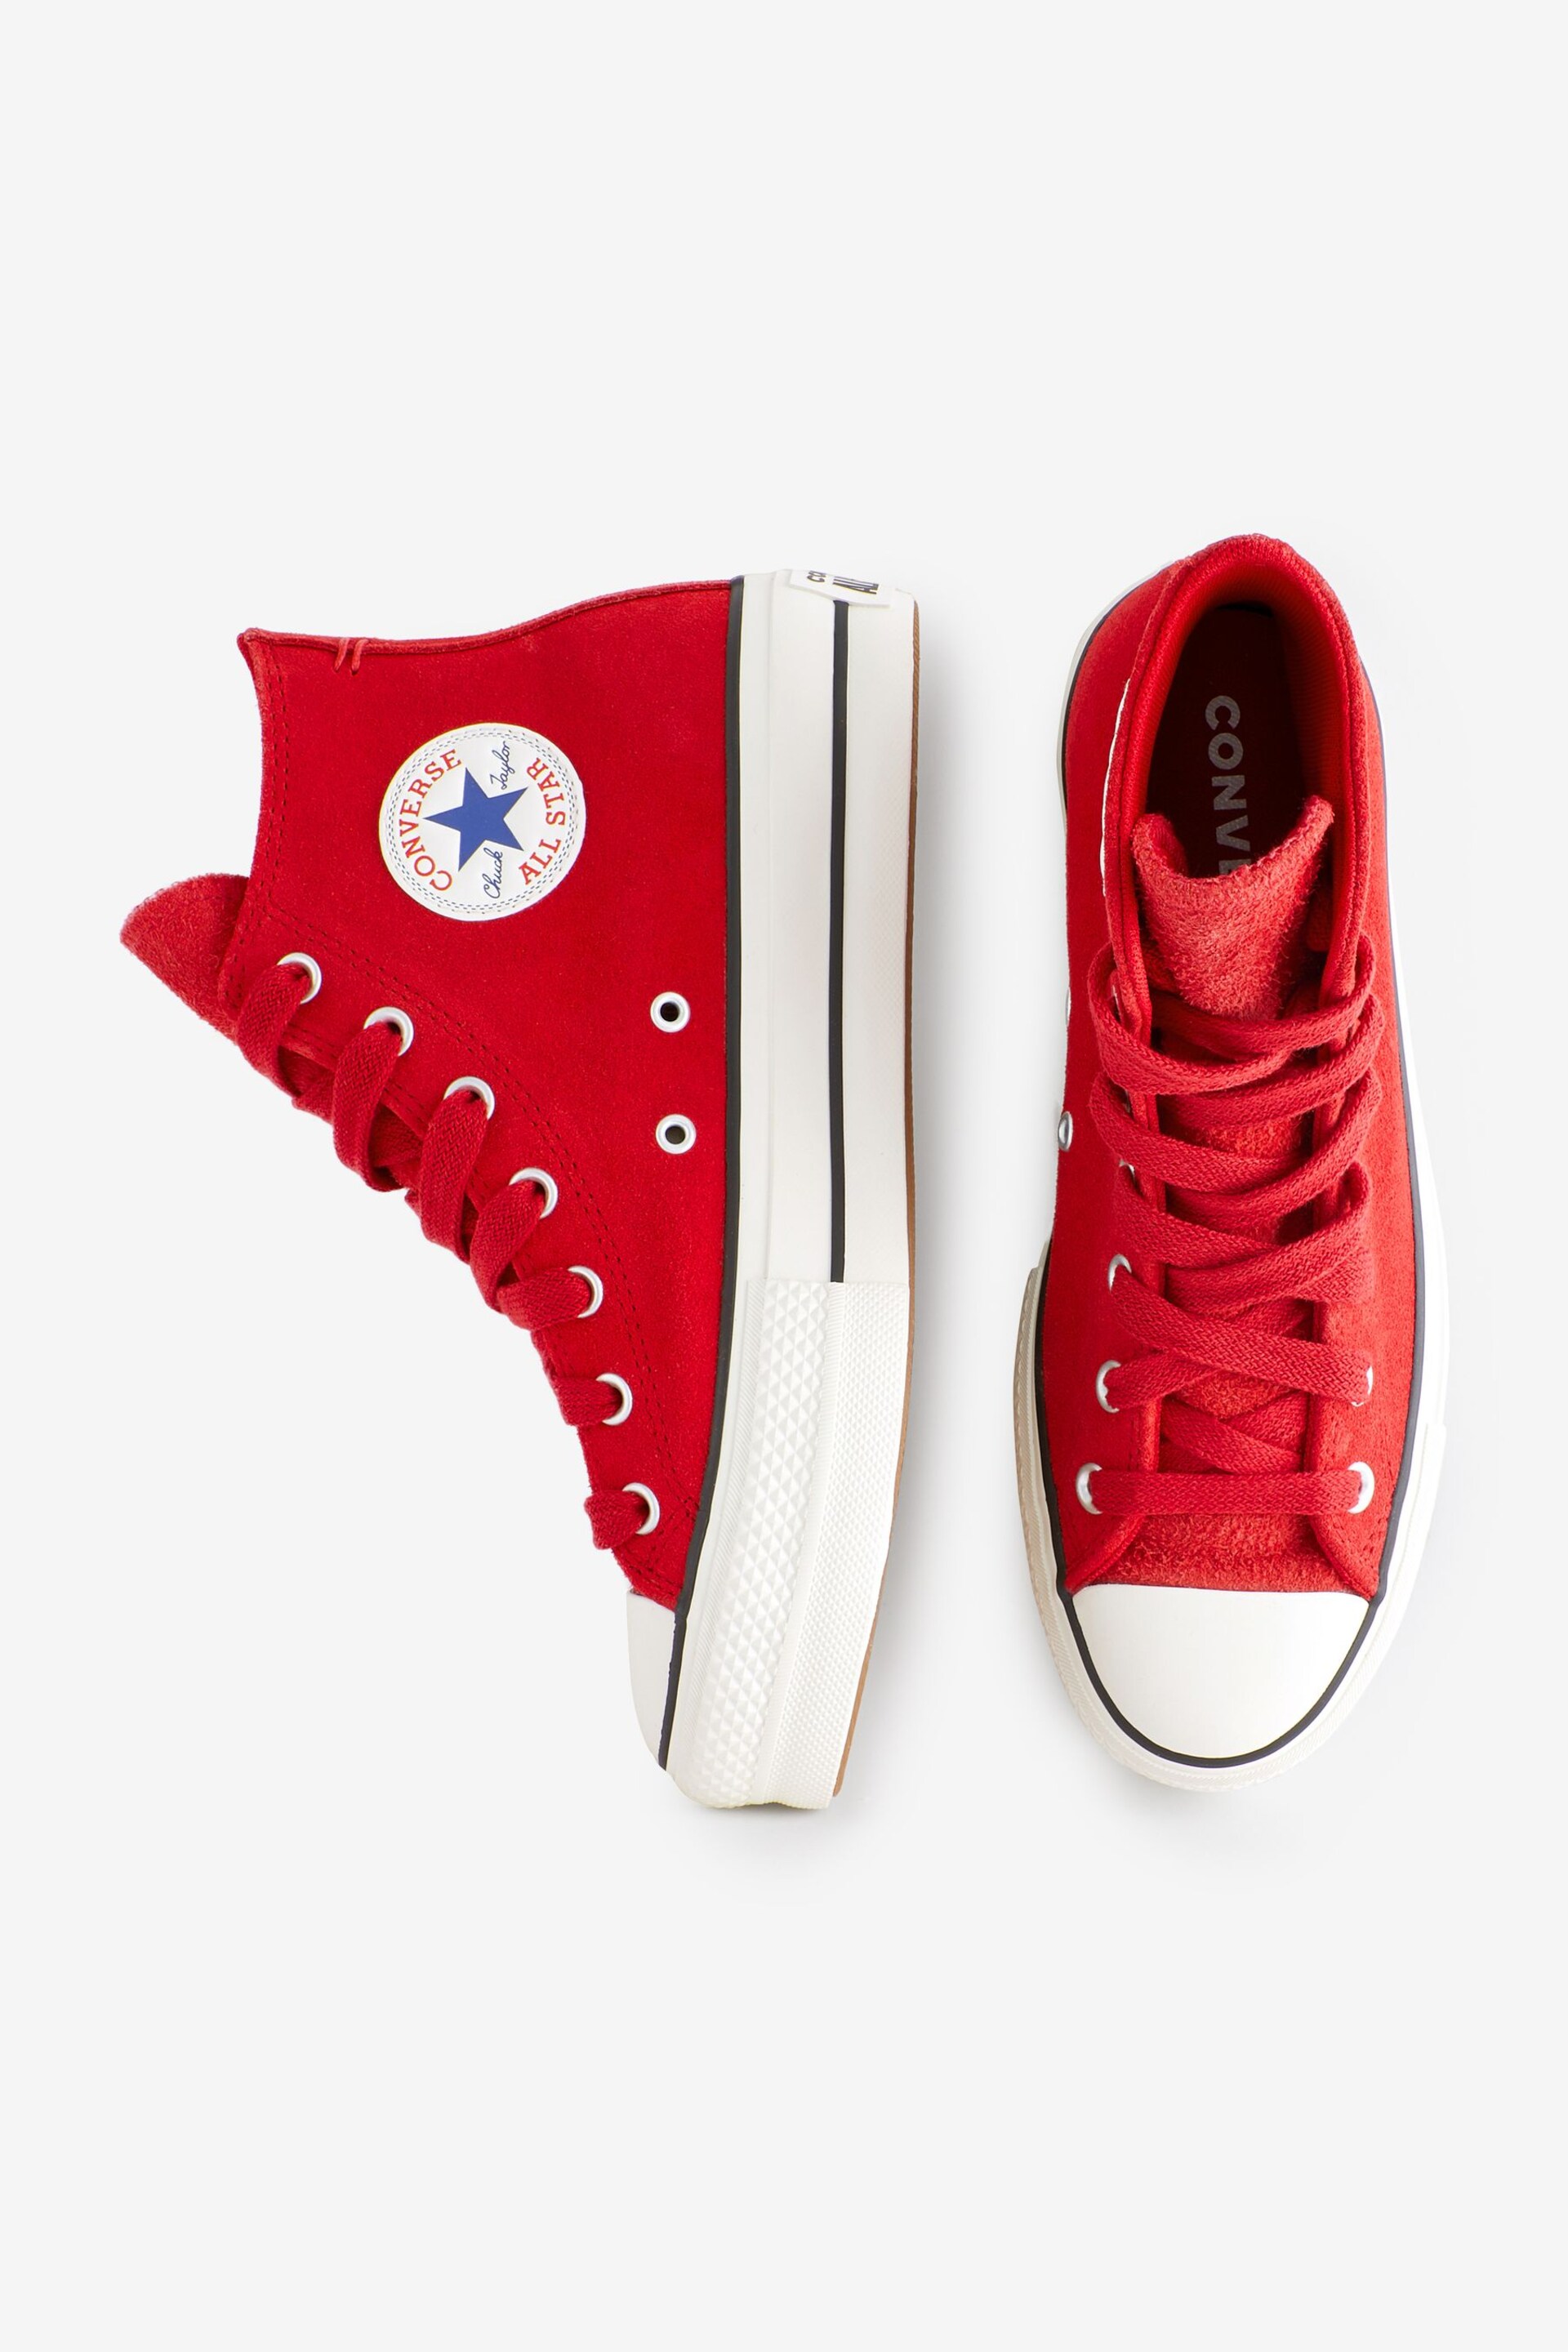 Converse Red Platform Lift Trainers - Image 6 of 9